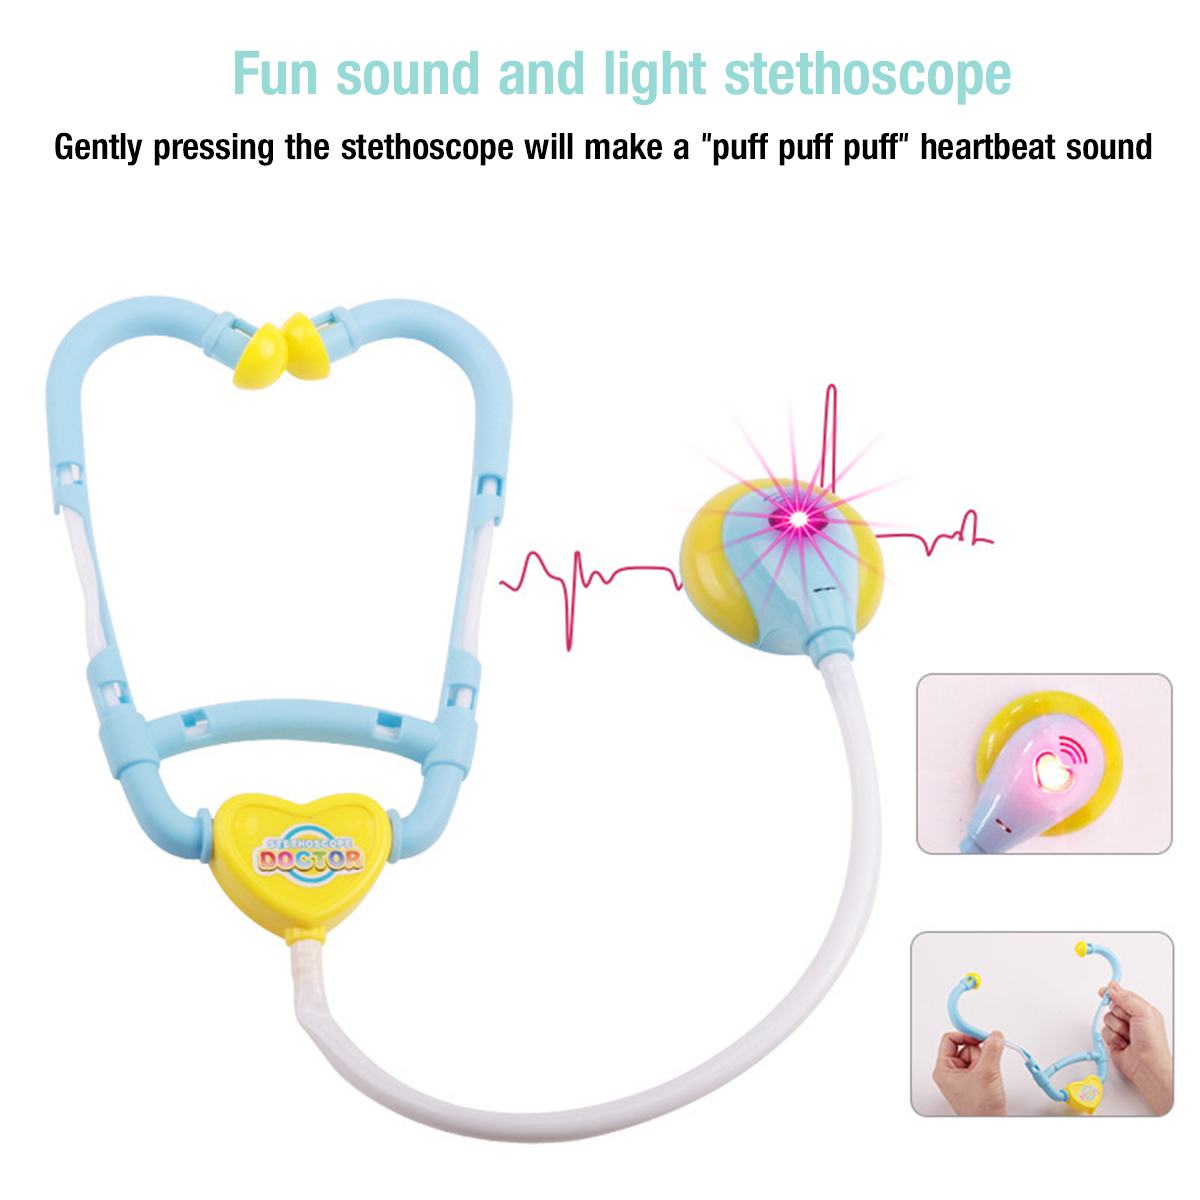 Simulation-Sound-And-Light-Stethoscope-Medical-Kit-Play-House-Toy-Set-With-Doctor-Uniform-Early-Educ-1818653-6